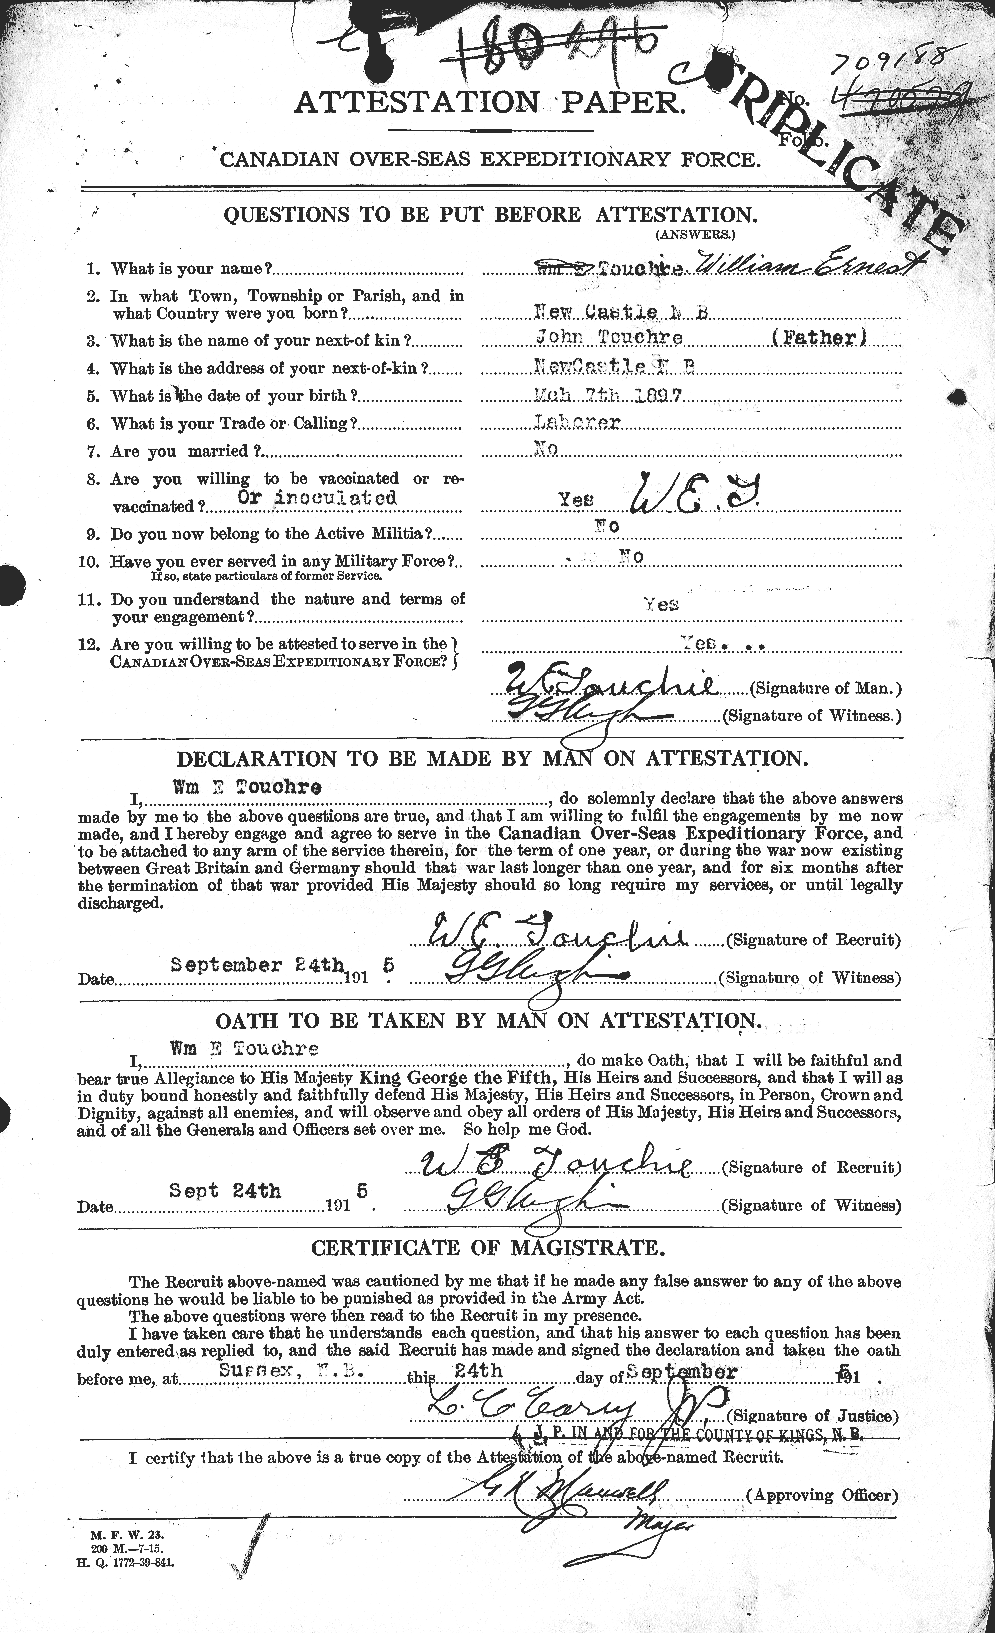 Personnel Records of the First World War - CEF 650133a